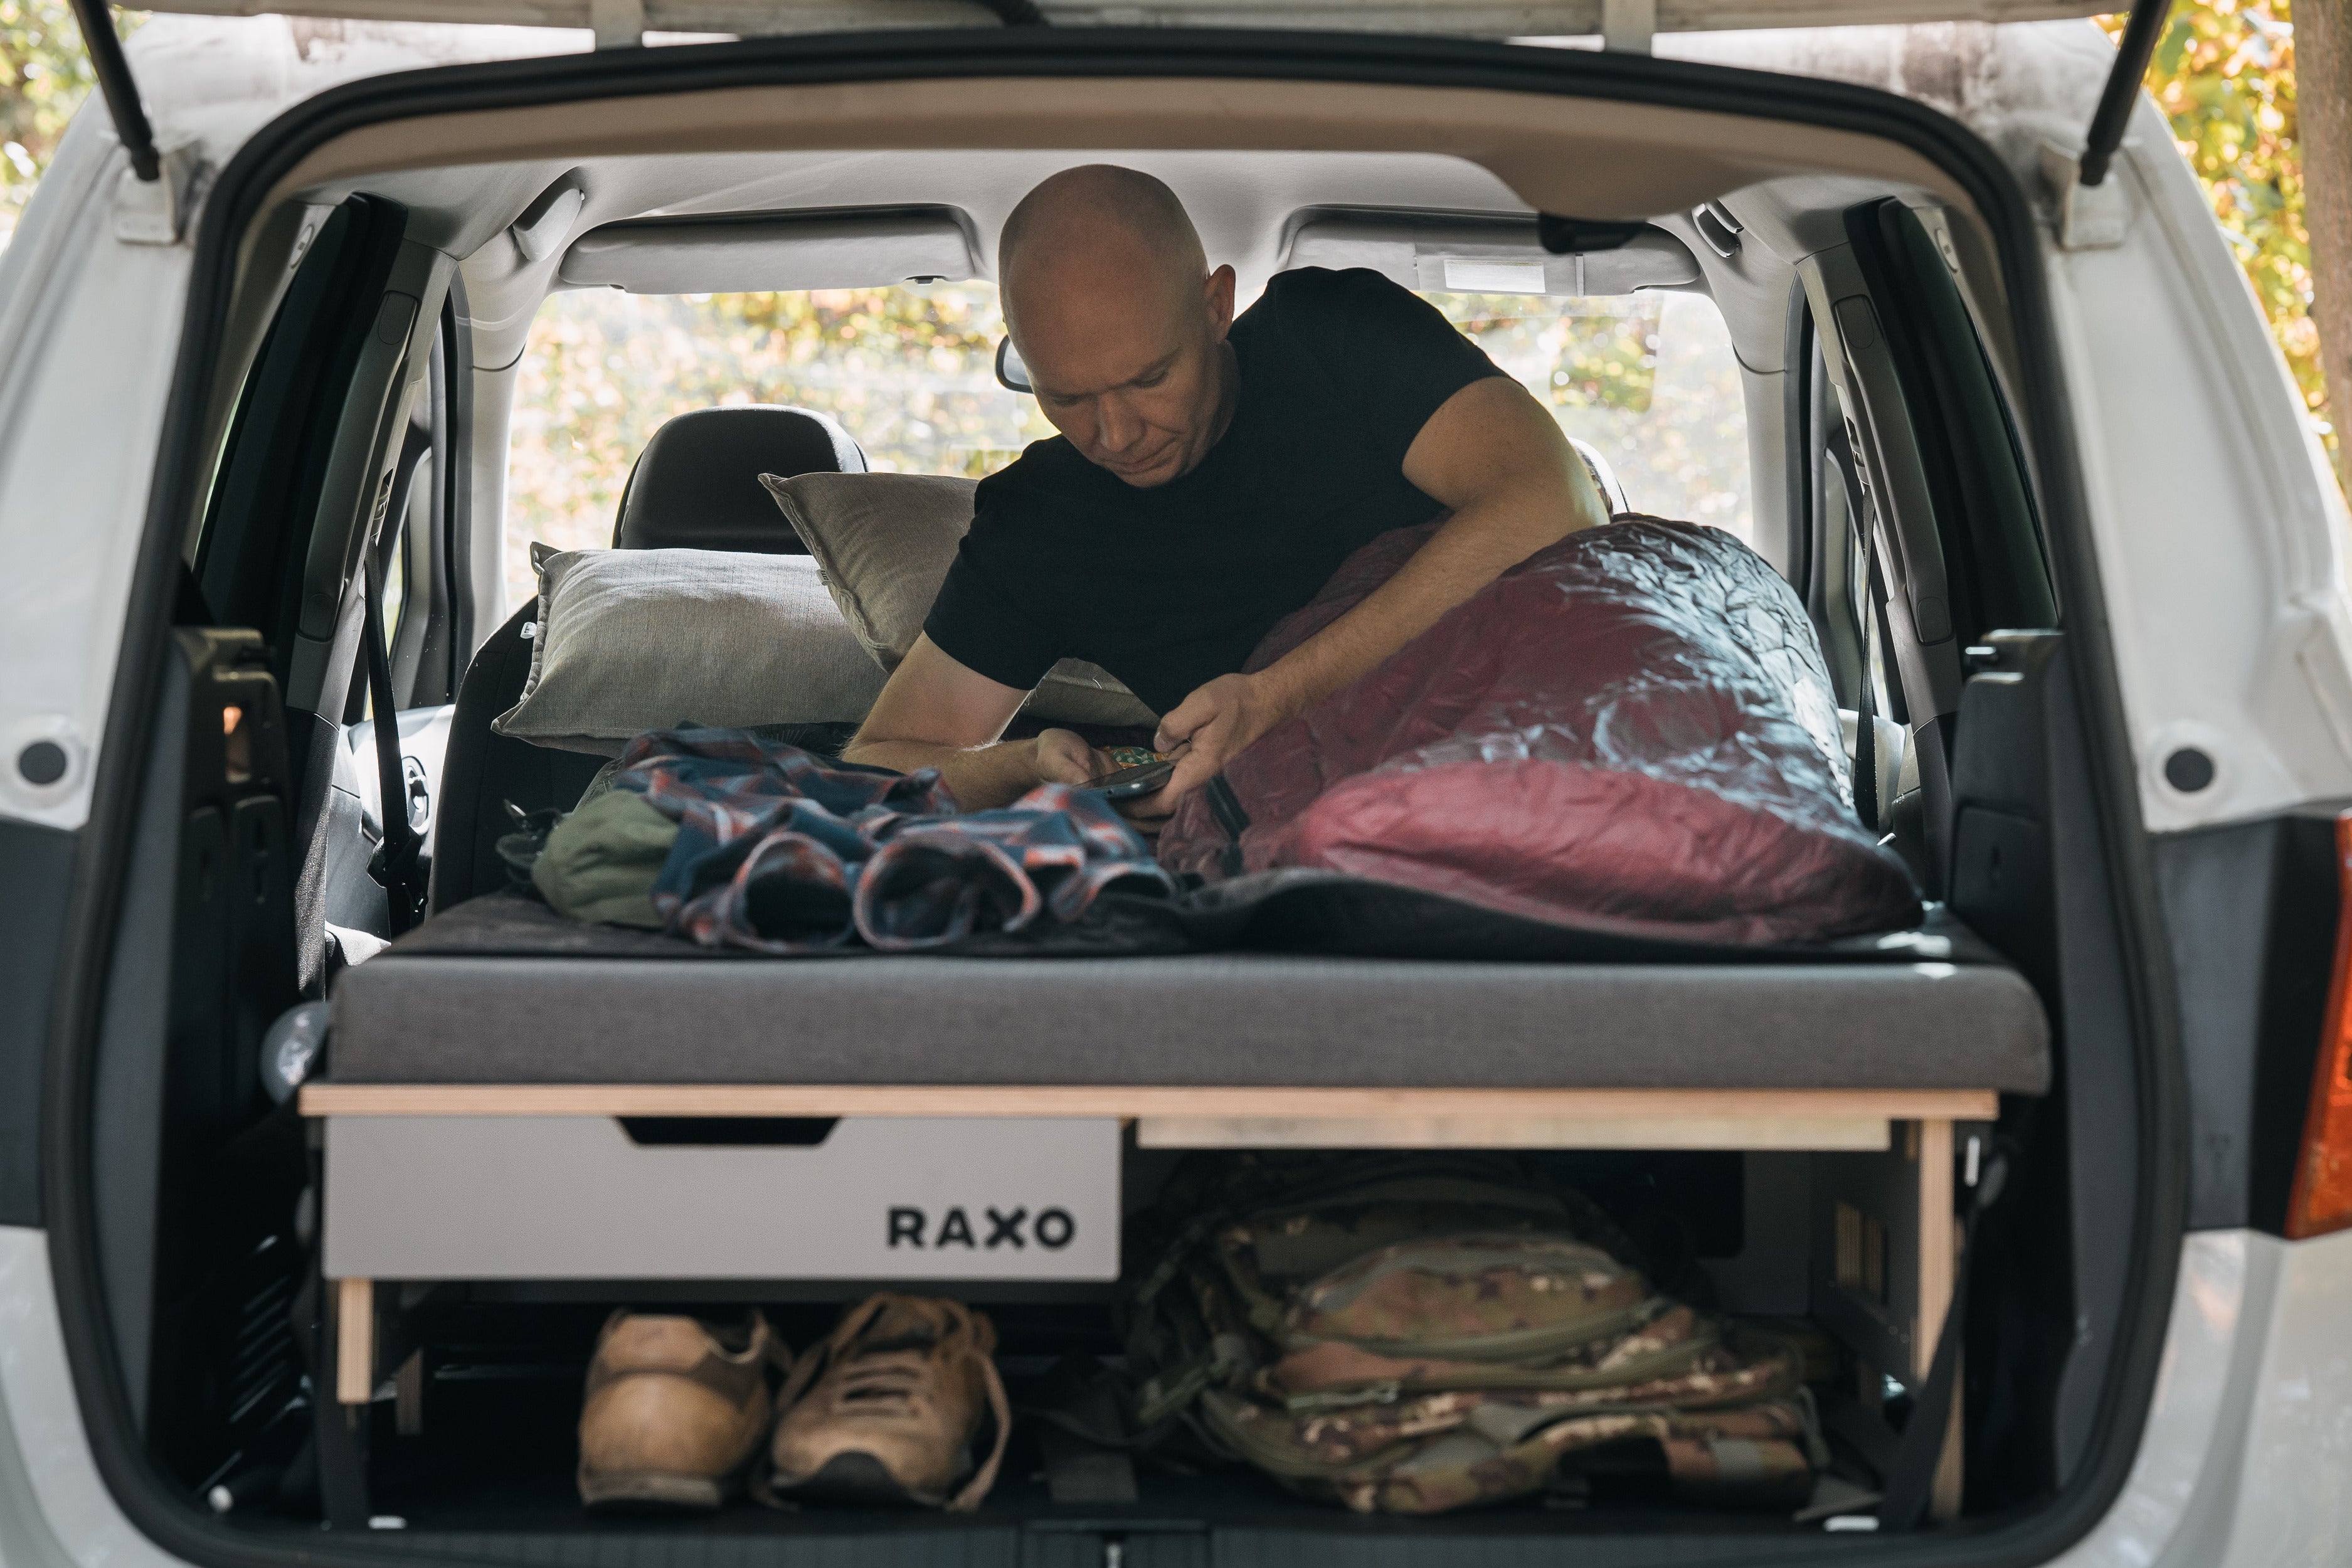 RAXO MONCK Campervan Module - Turn Your Car into a Comfortable Home on Wheels